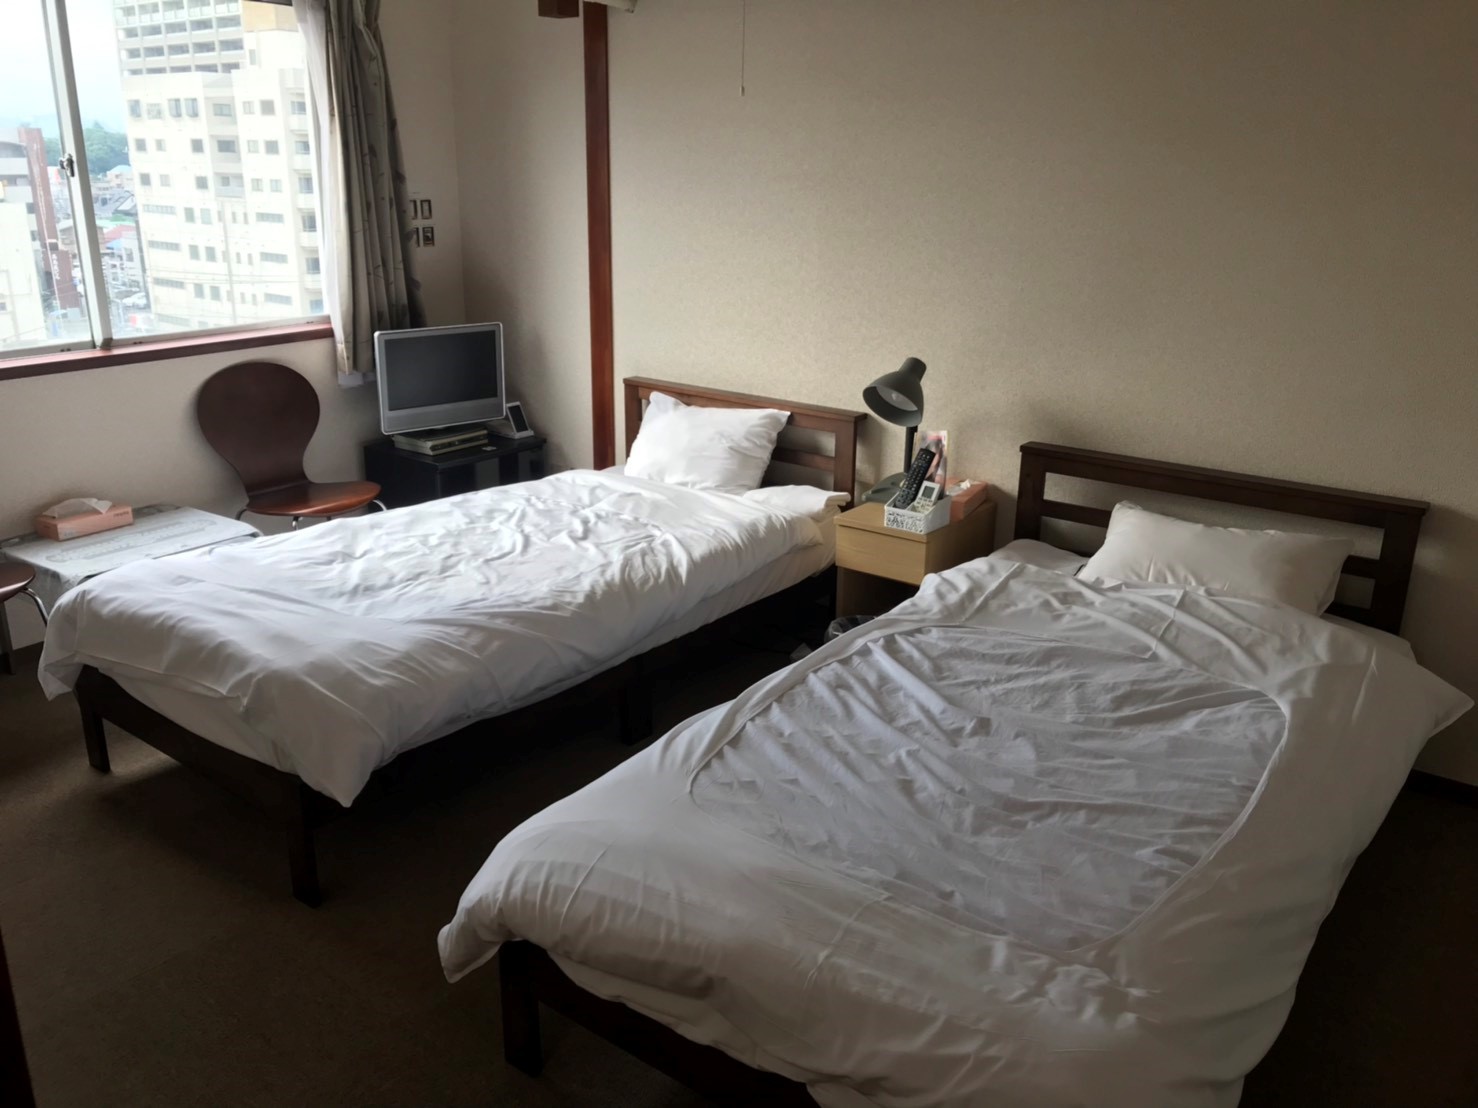 Hotel New Kashiwa Ideally located in the Oyama area, Hotel New Kashiwa promises a relaxing and wonderful visit. The property has everything you need for a comfortable stay. Bar, vending machine, fax or photo copying in